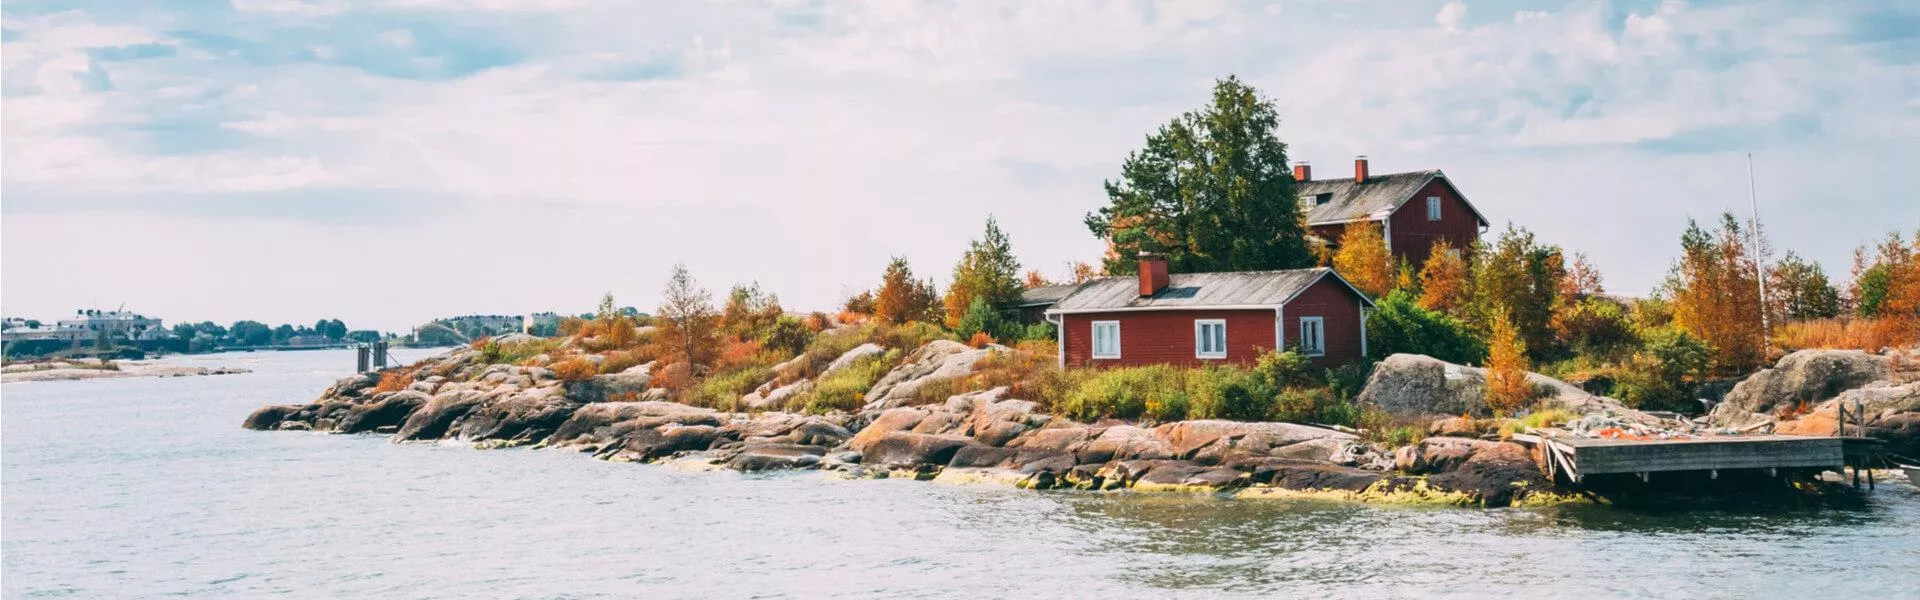 Campings in Finland